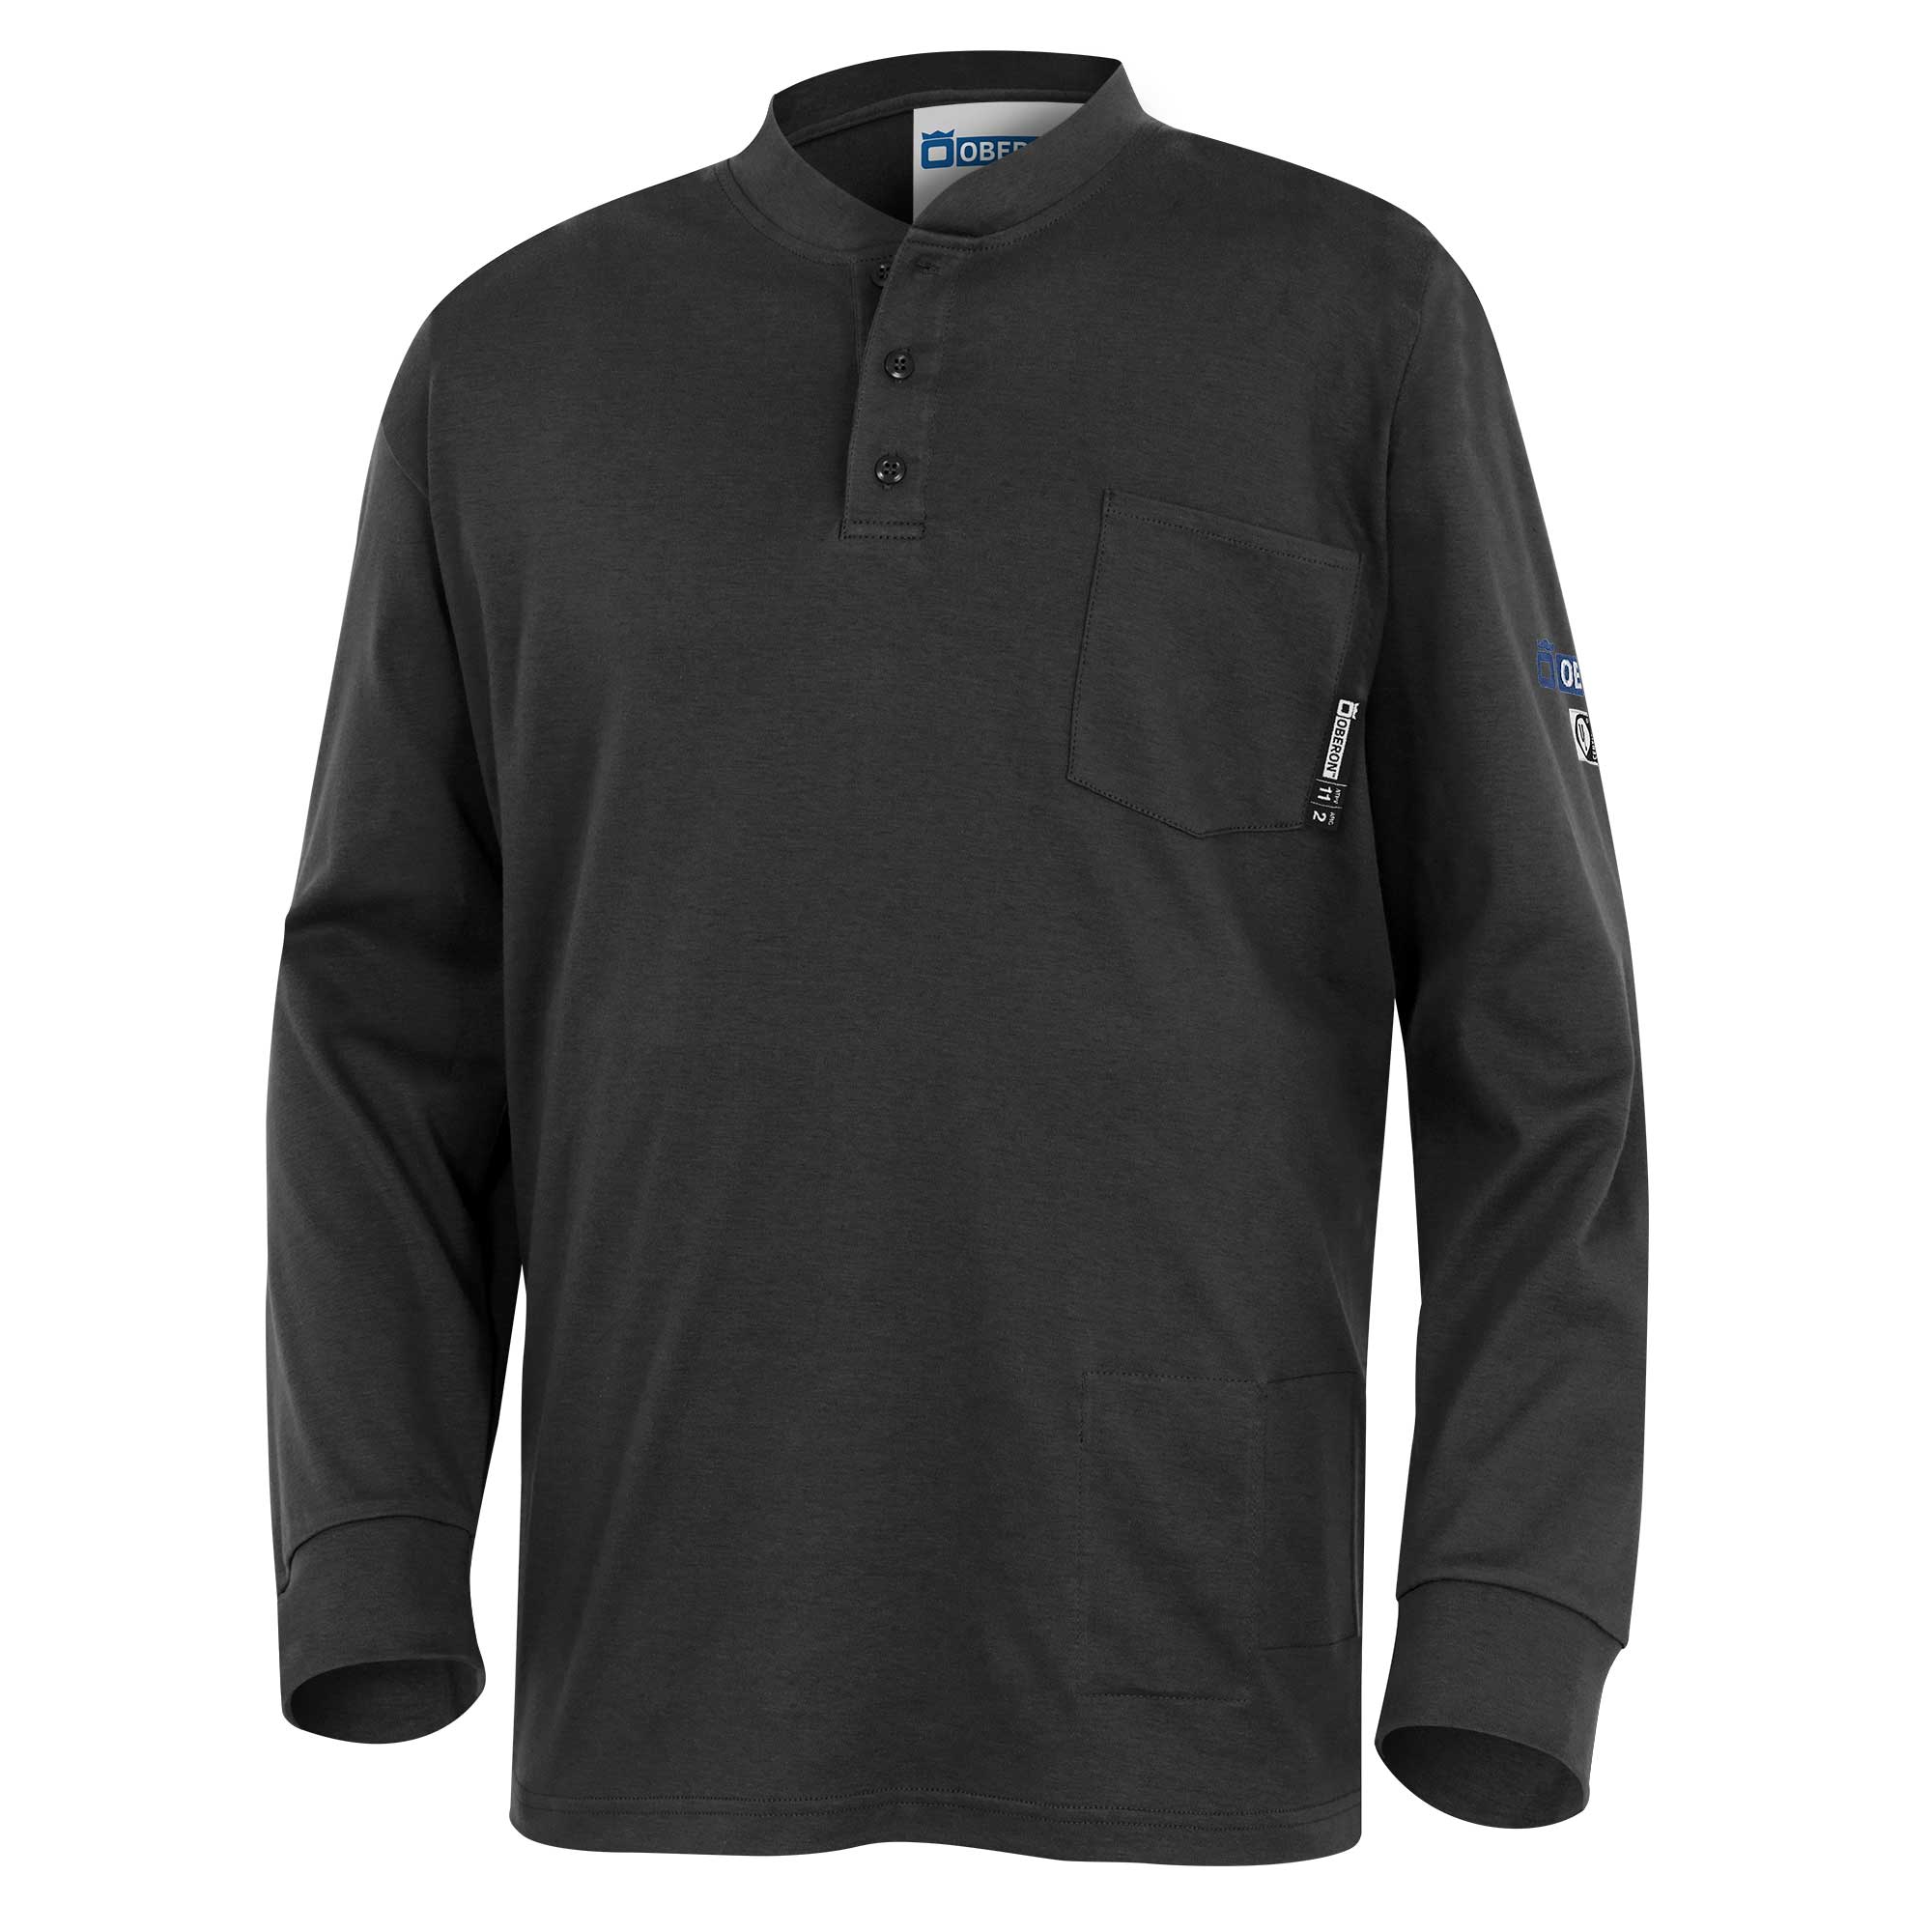 Flame Resistant Lightweight 11 cal Arc-Rated Cotton Henley Shirt